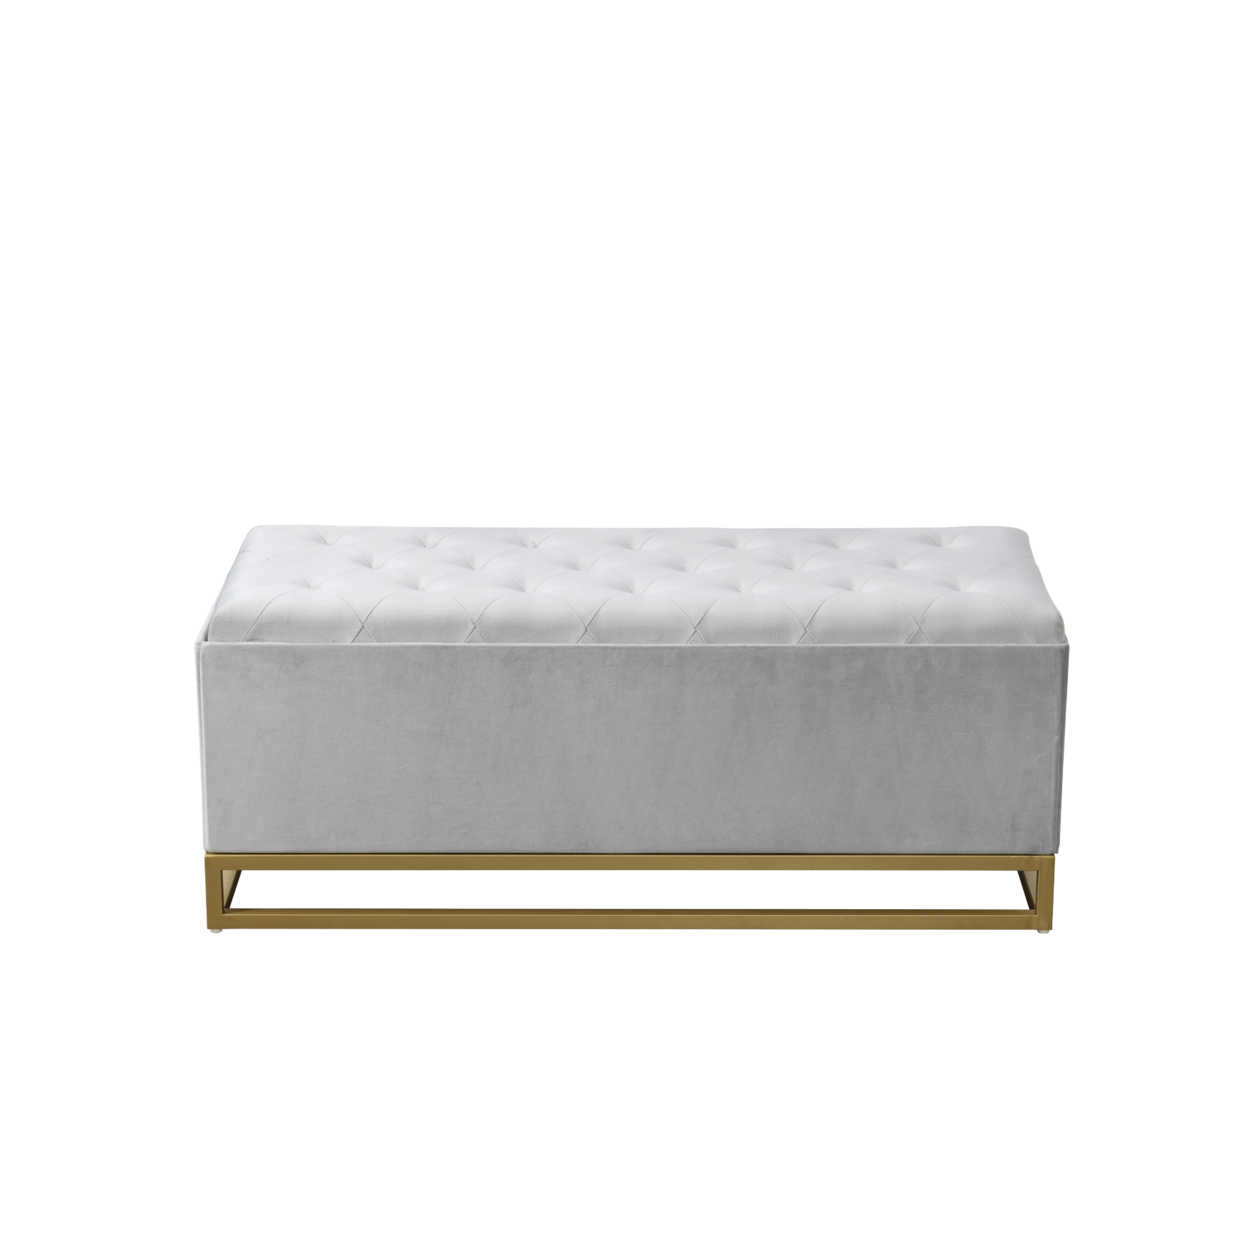 Iconic Home Kaili Storage Bench Velvet Upholstered Tufted Seat Gold Tone Metal Base With Discrete Interior Compartment - Green